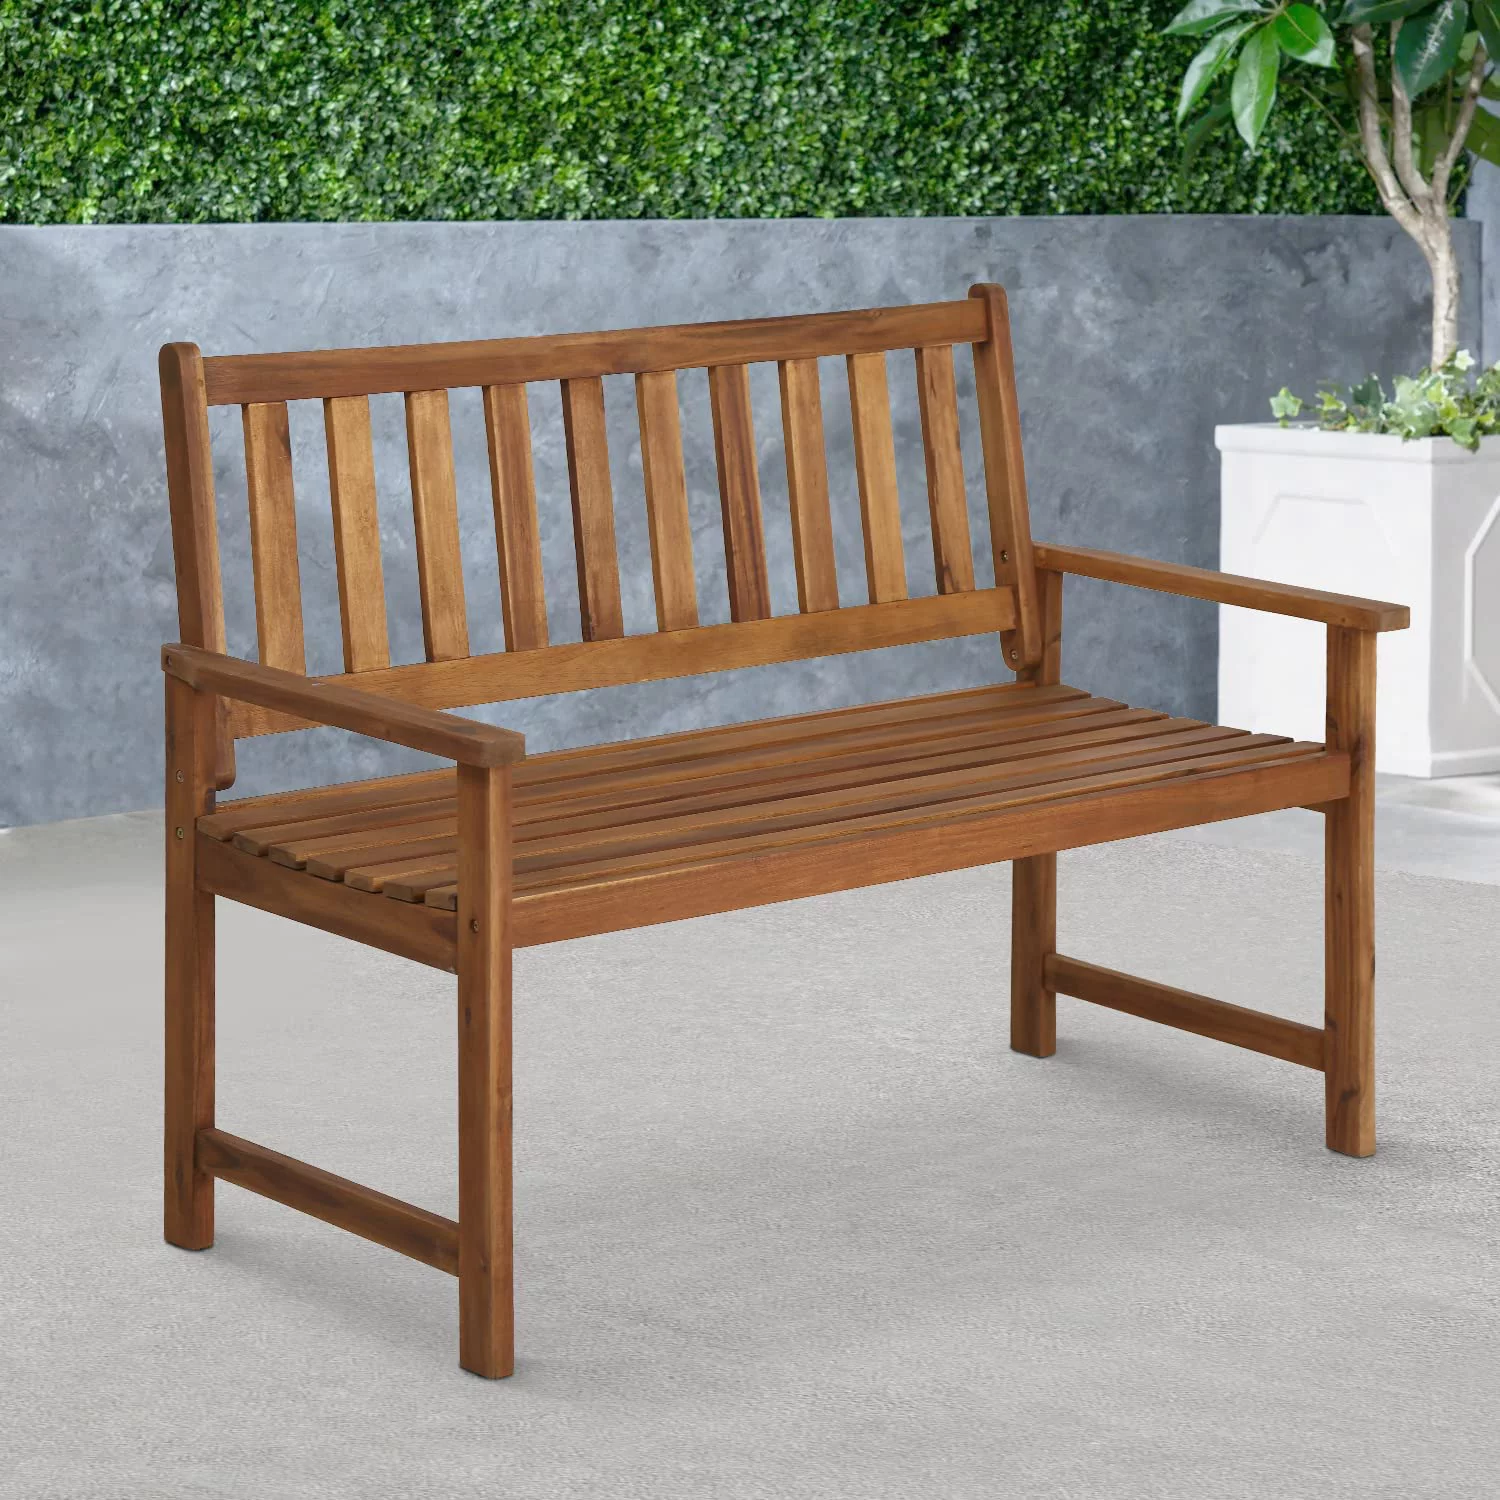 outdoor bench ideas for the front porch